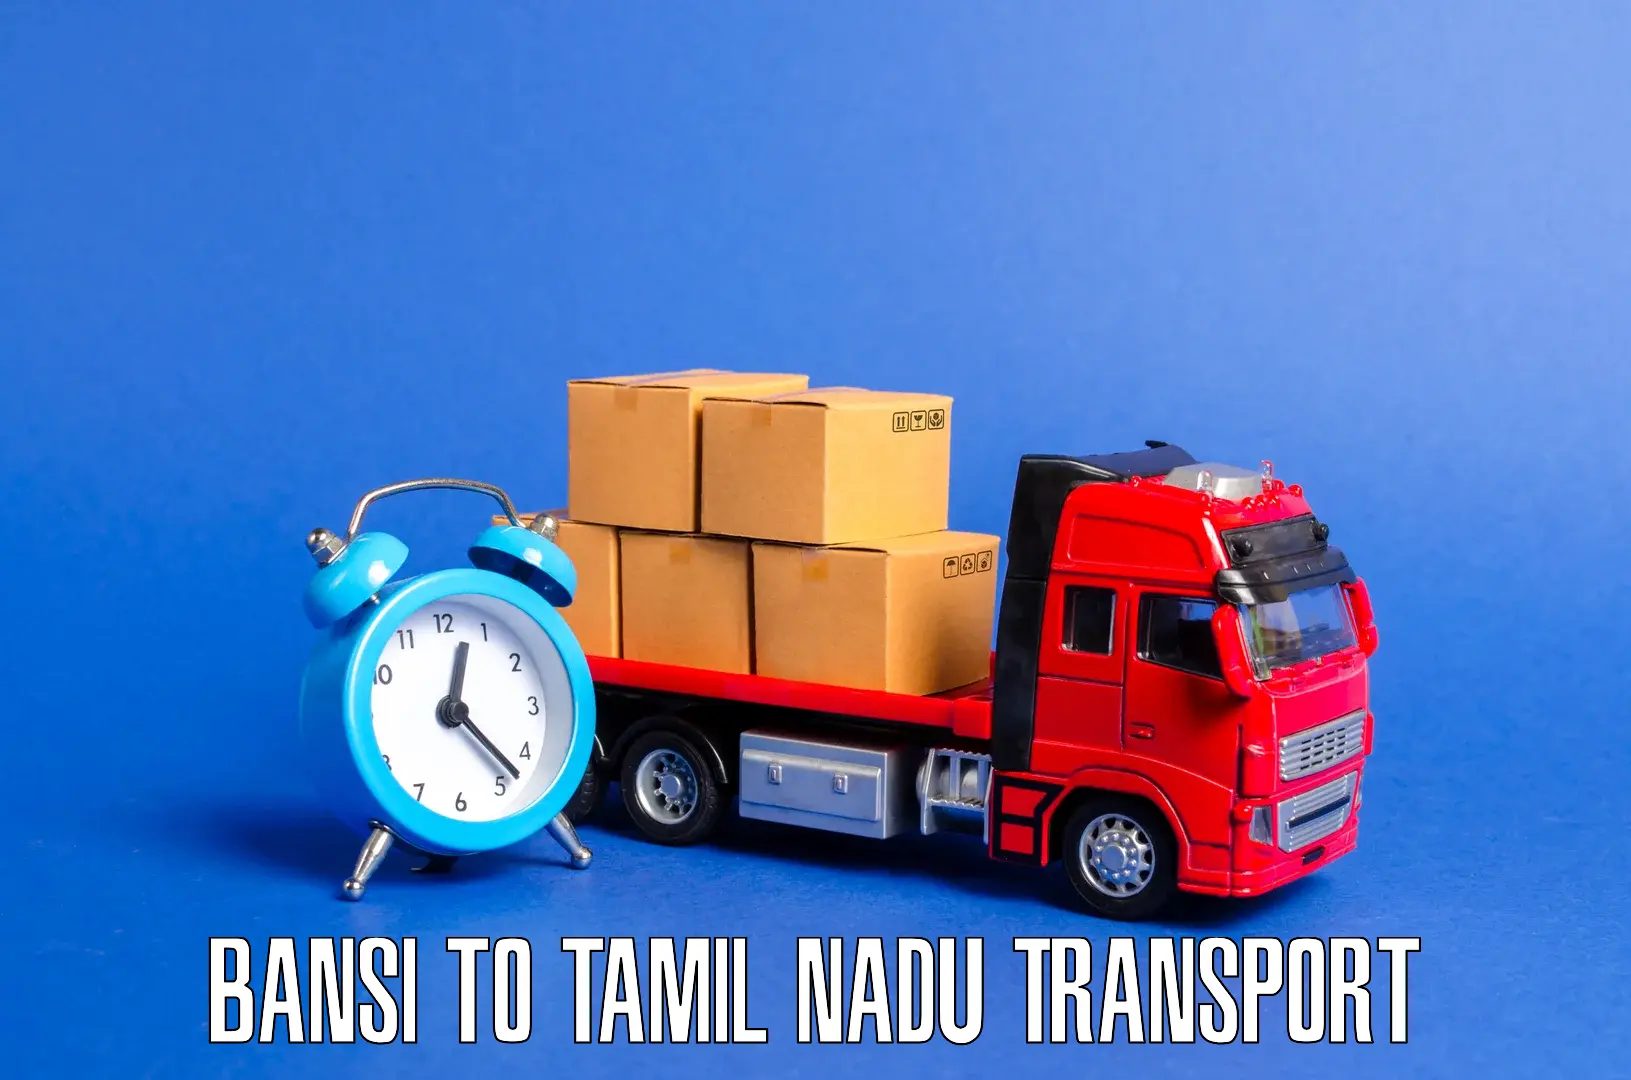 Vehicle transport services Bansi to Sri Ramachandra Institute of Higher Education and Research Chennai